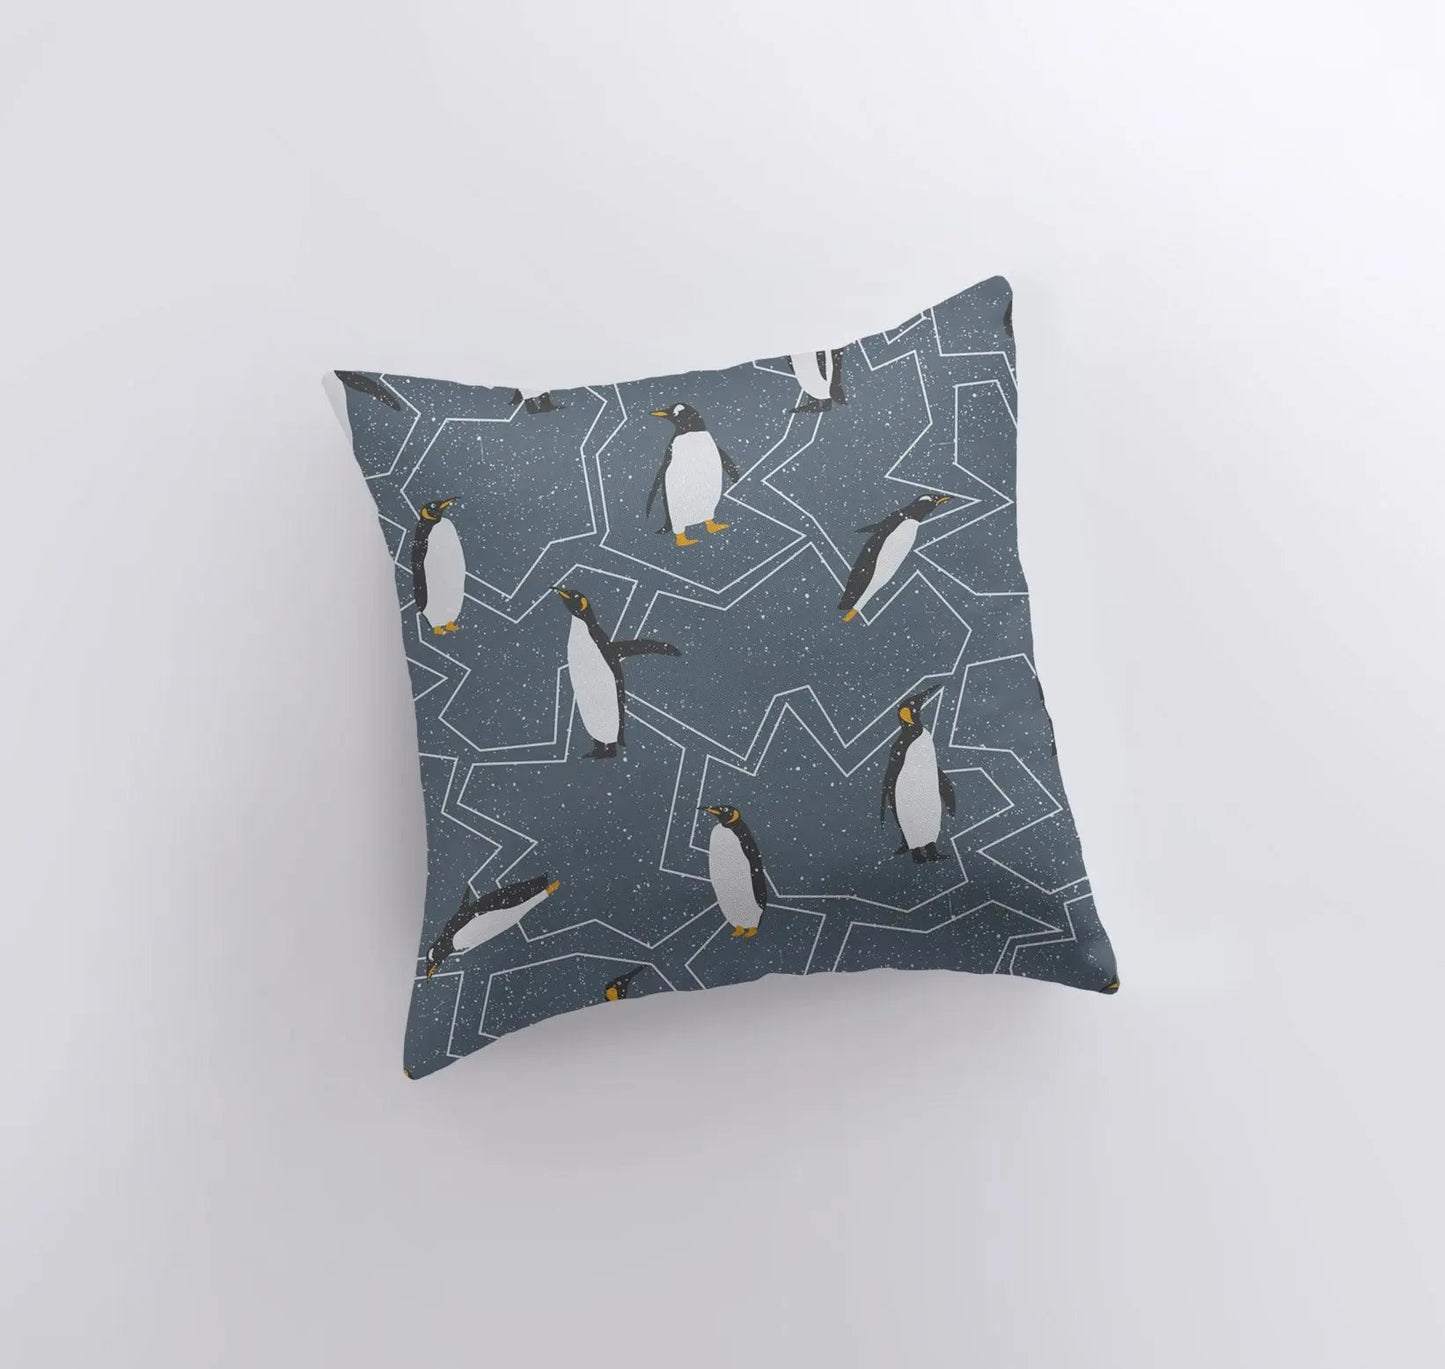 Arctic Penguin | Blue Pillow Cover | Home Decor | Throw Pillow | Snowflake Pillow | Christmas Pillow | Christmas tree | Christmas Gifts by UniikPillows